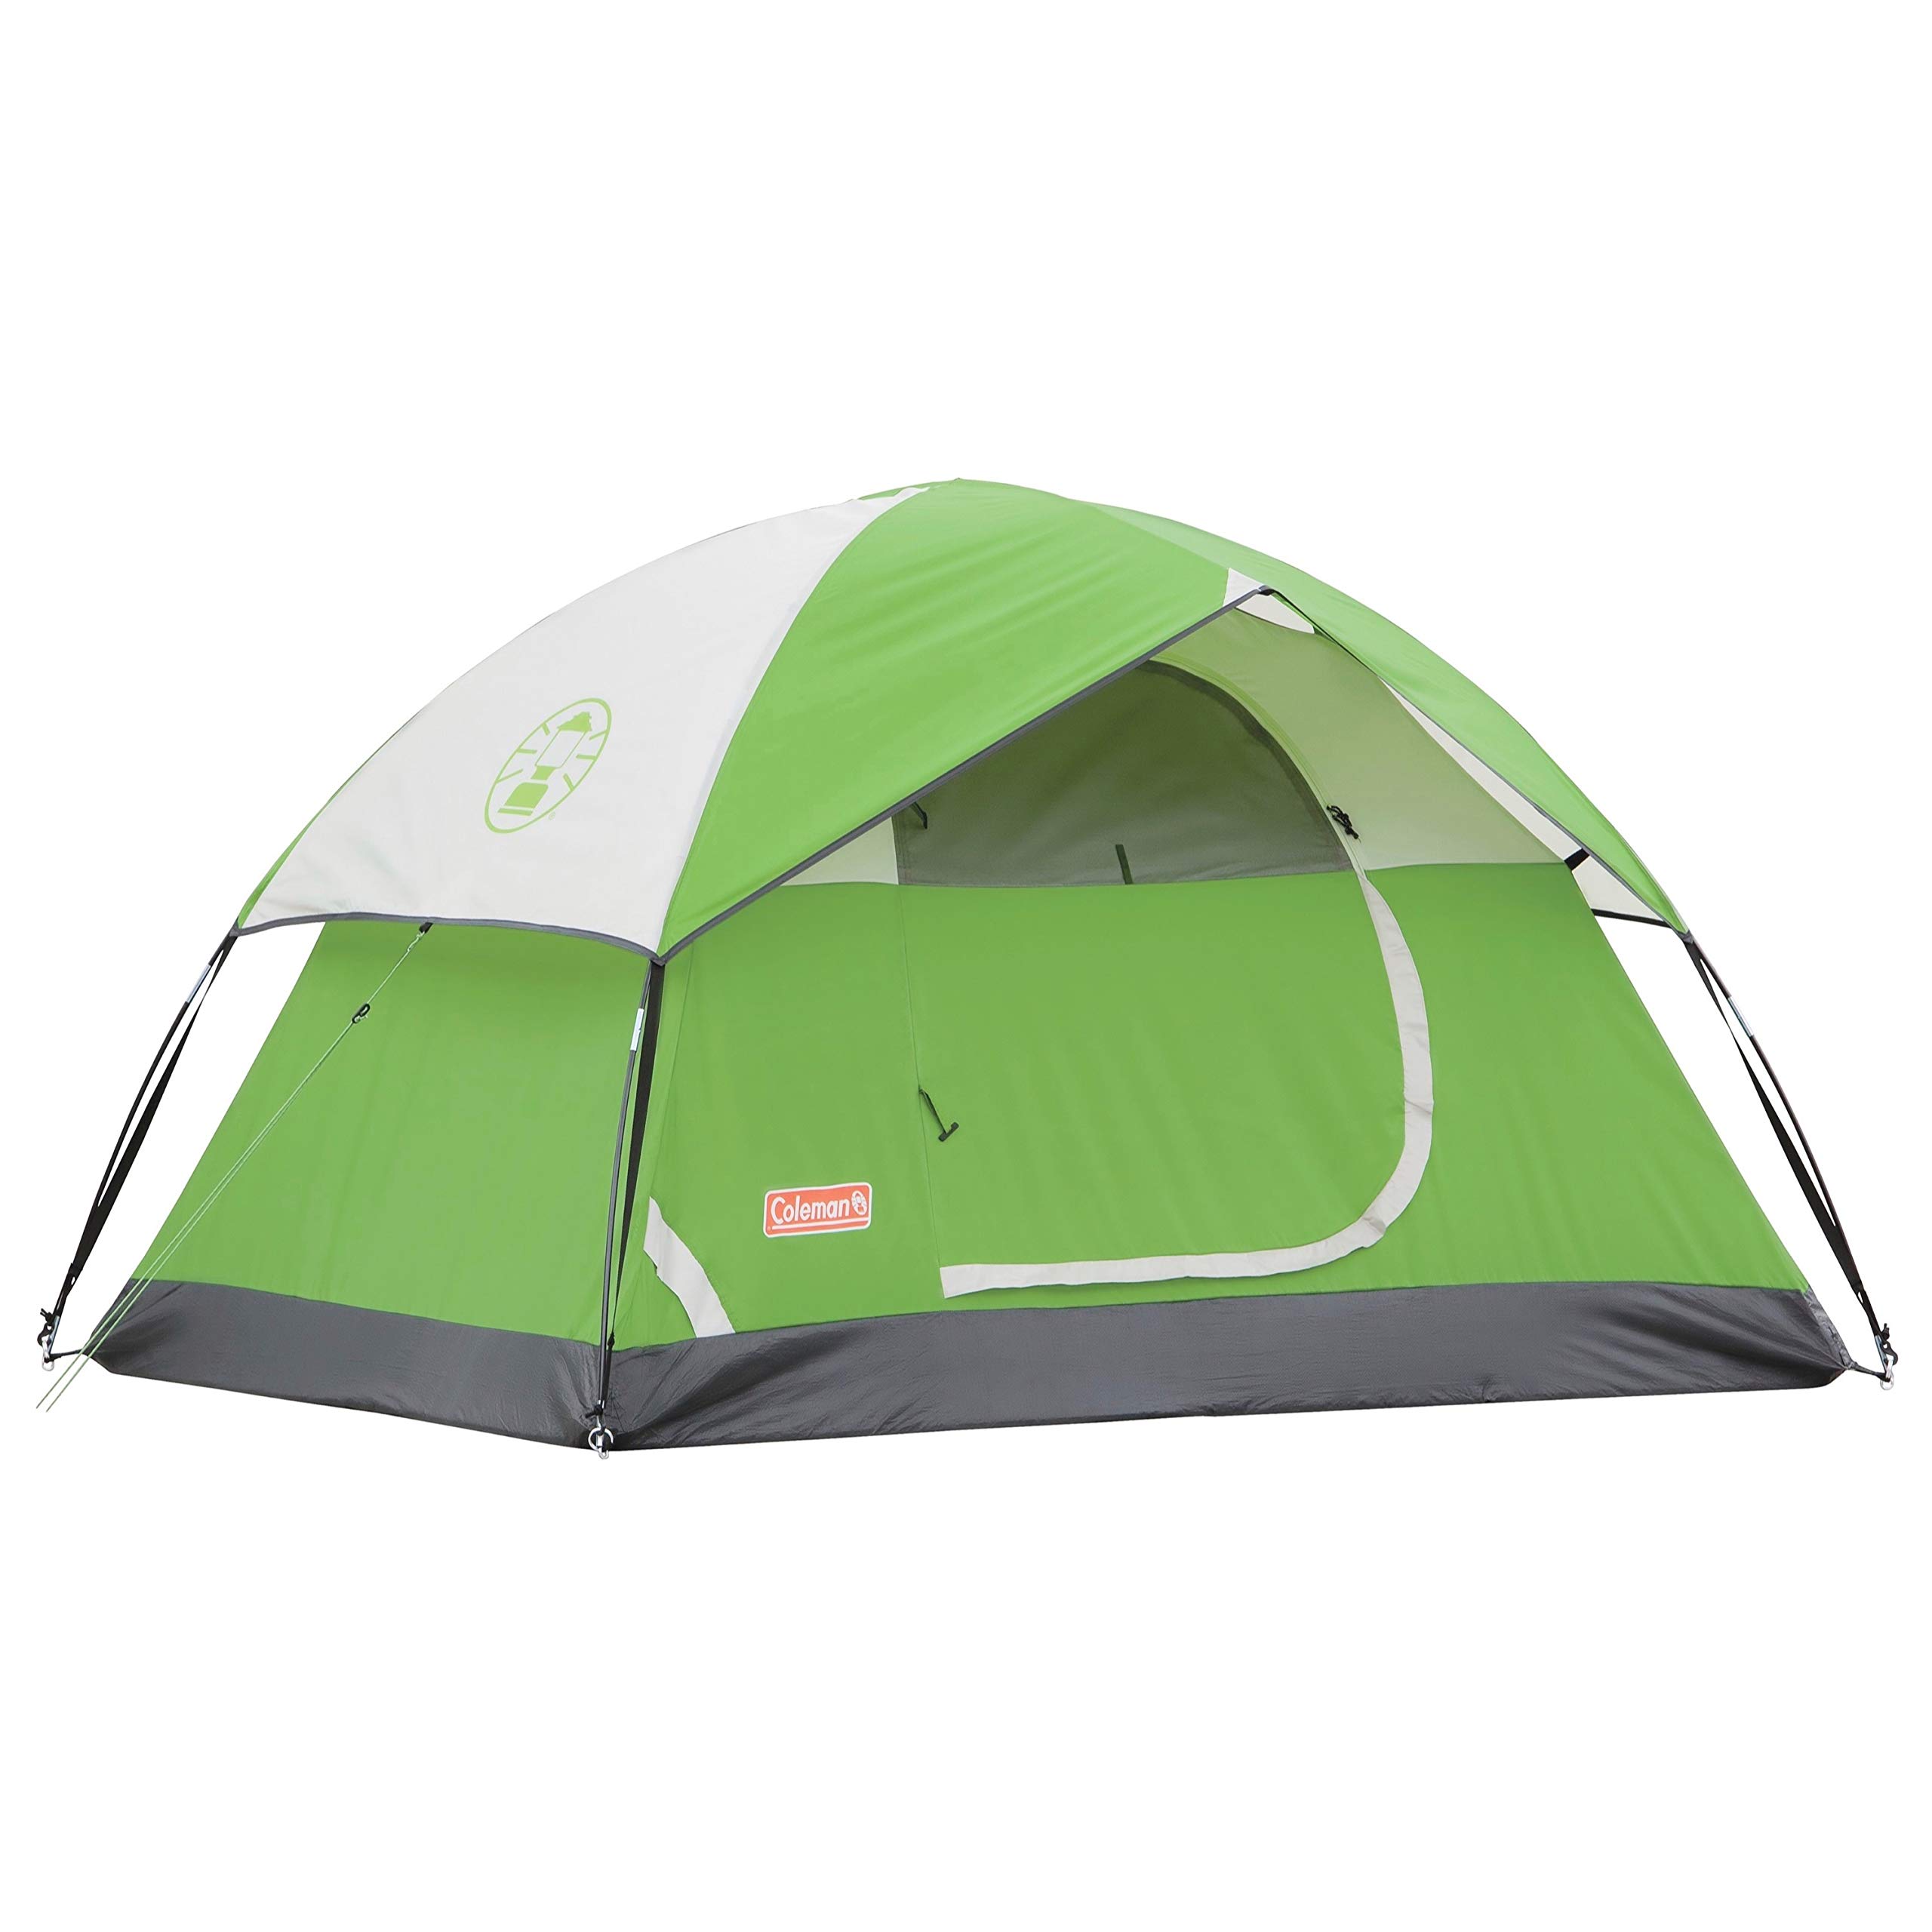 Coleman 2-Person Sundome Camping Tent (Palm Green) $25 + Free Shipping w/ Prime or on $25+